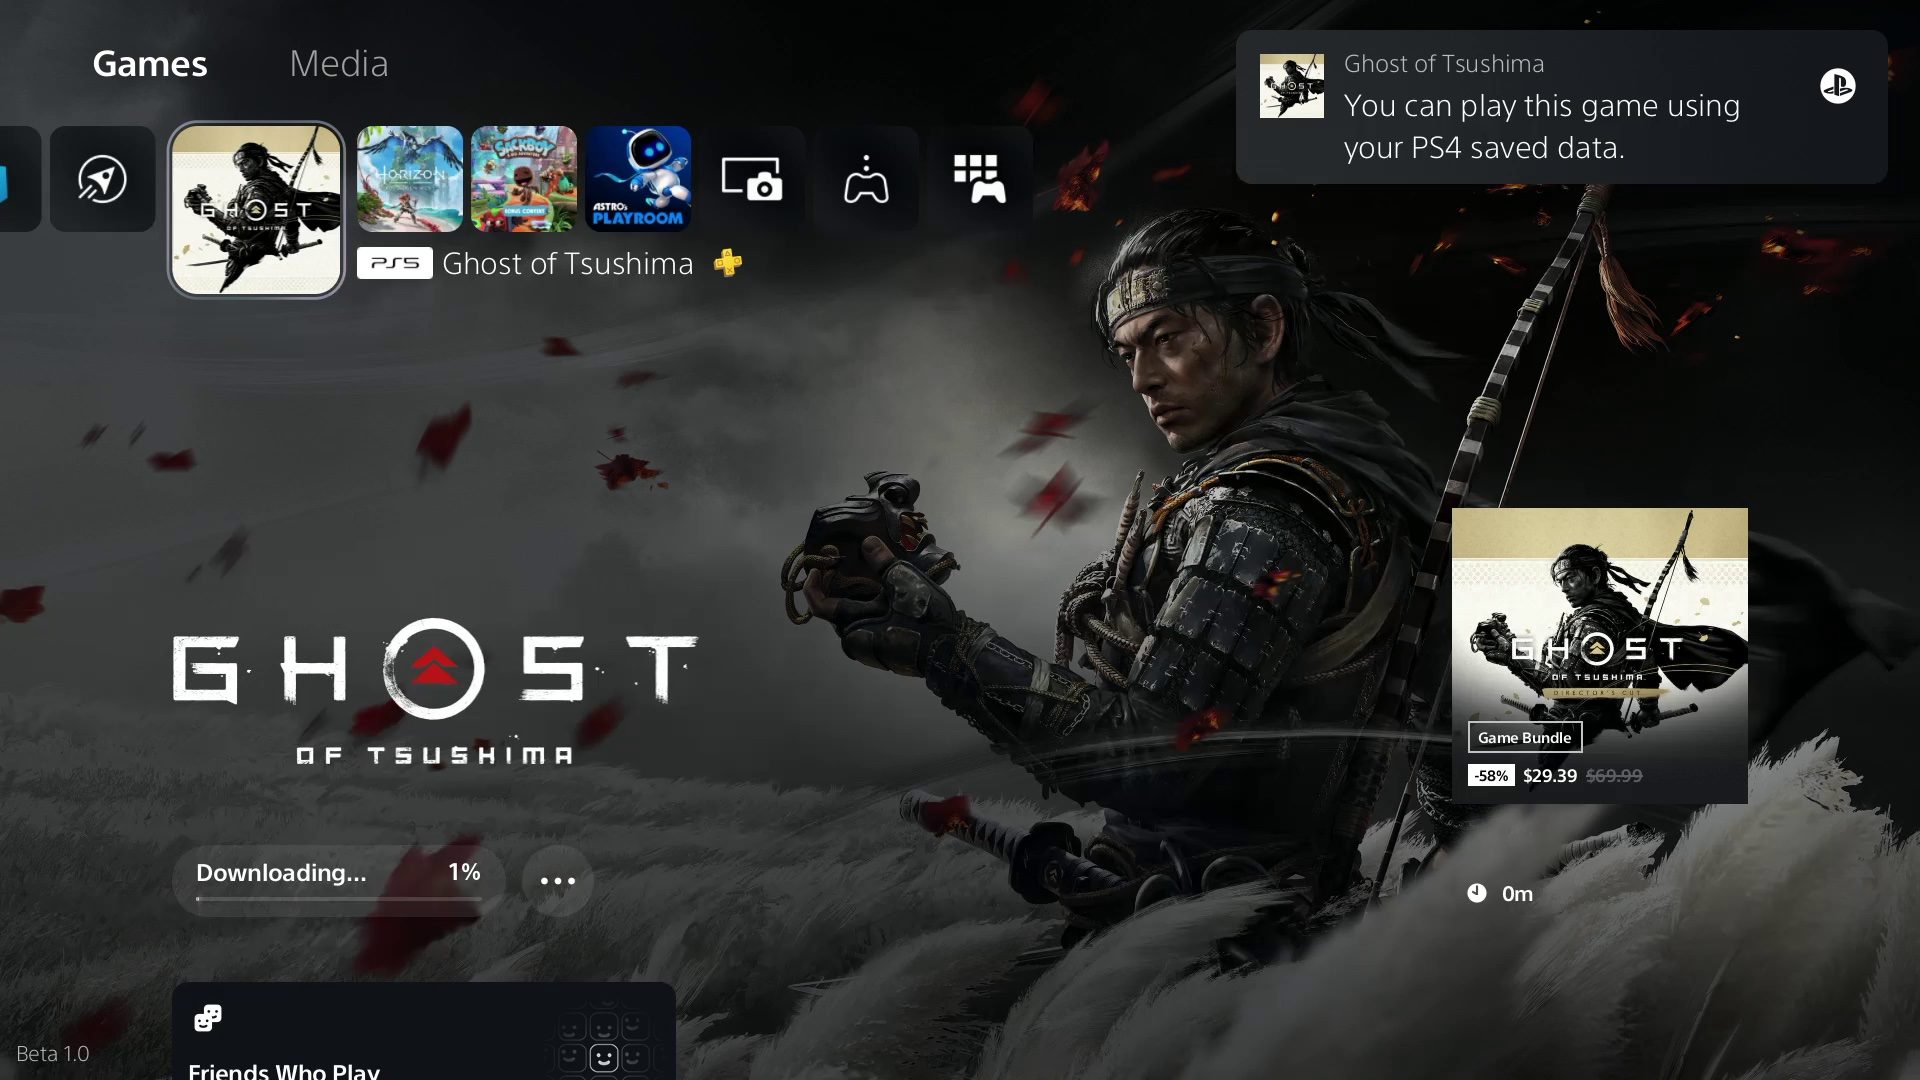 PlayStation 5 UI screenshot showing notification that Ghost of Tsushima PS4 save data is available for download